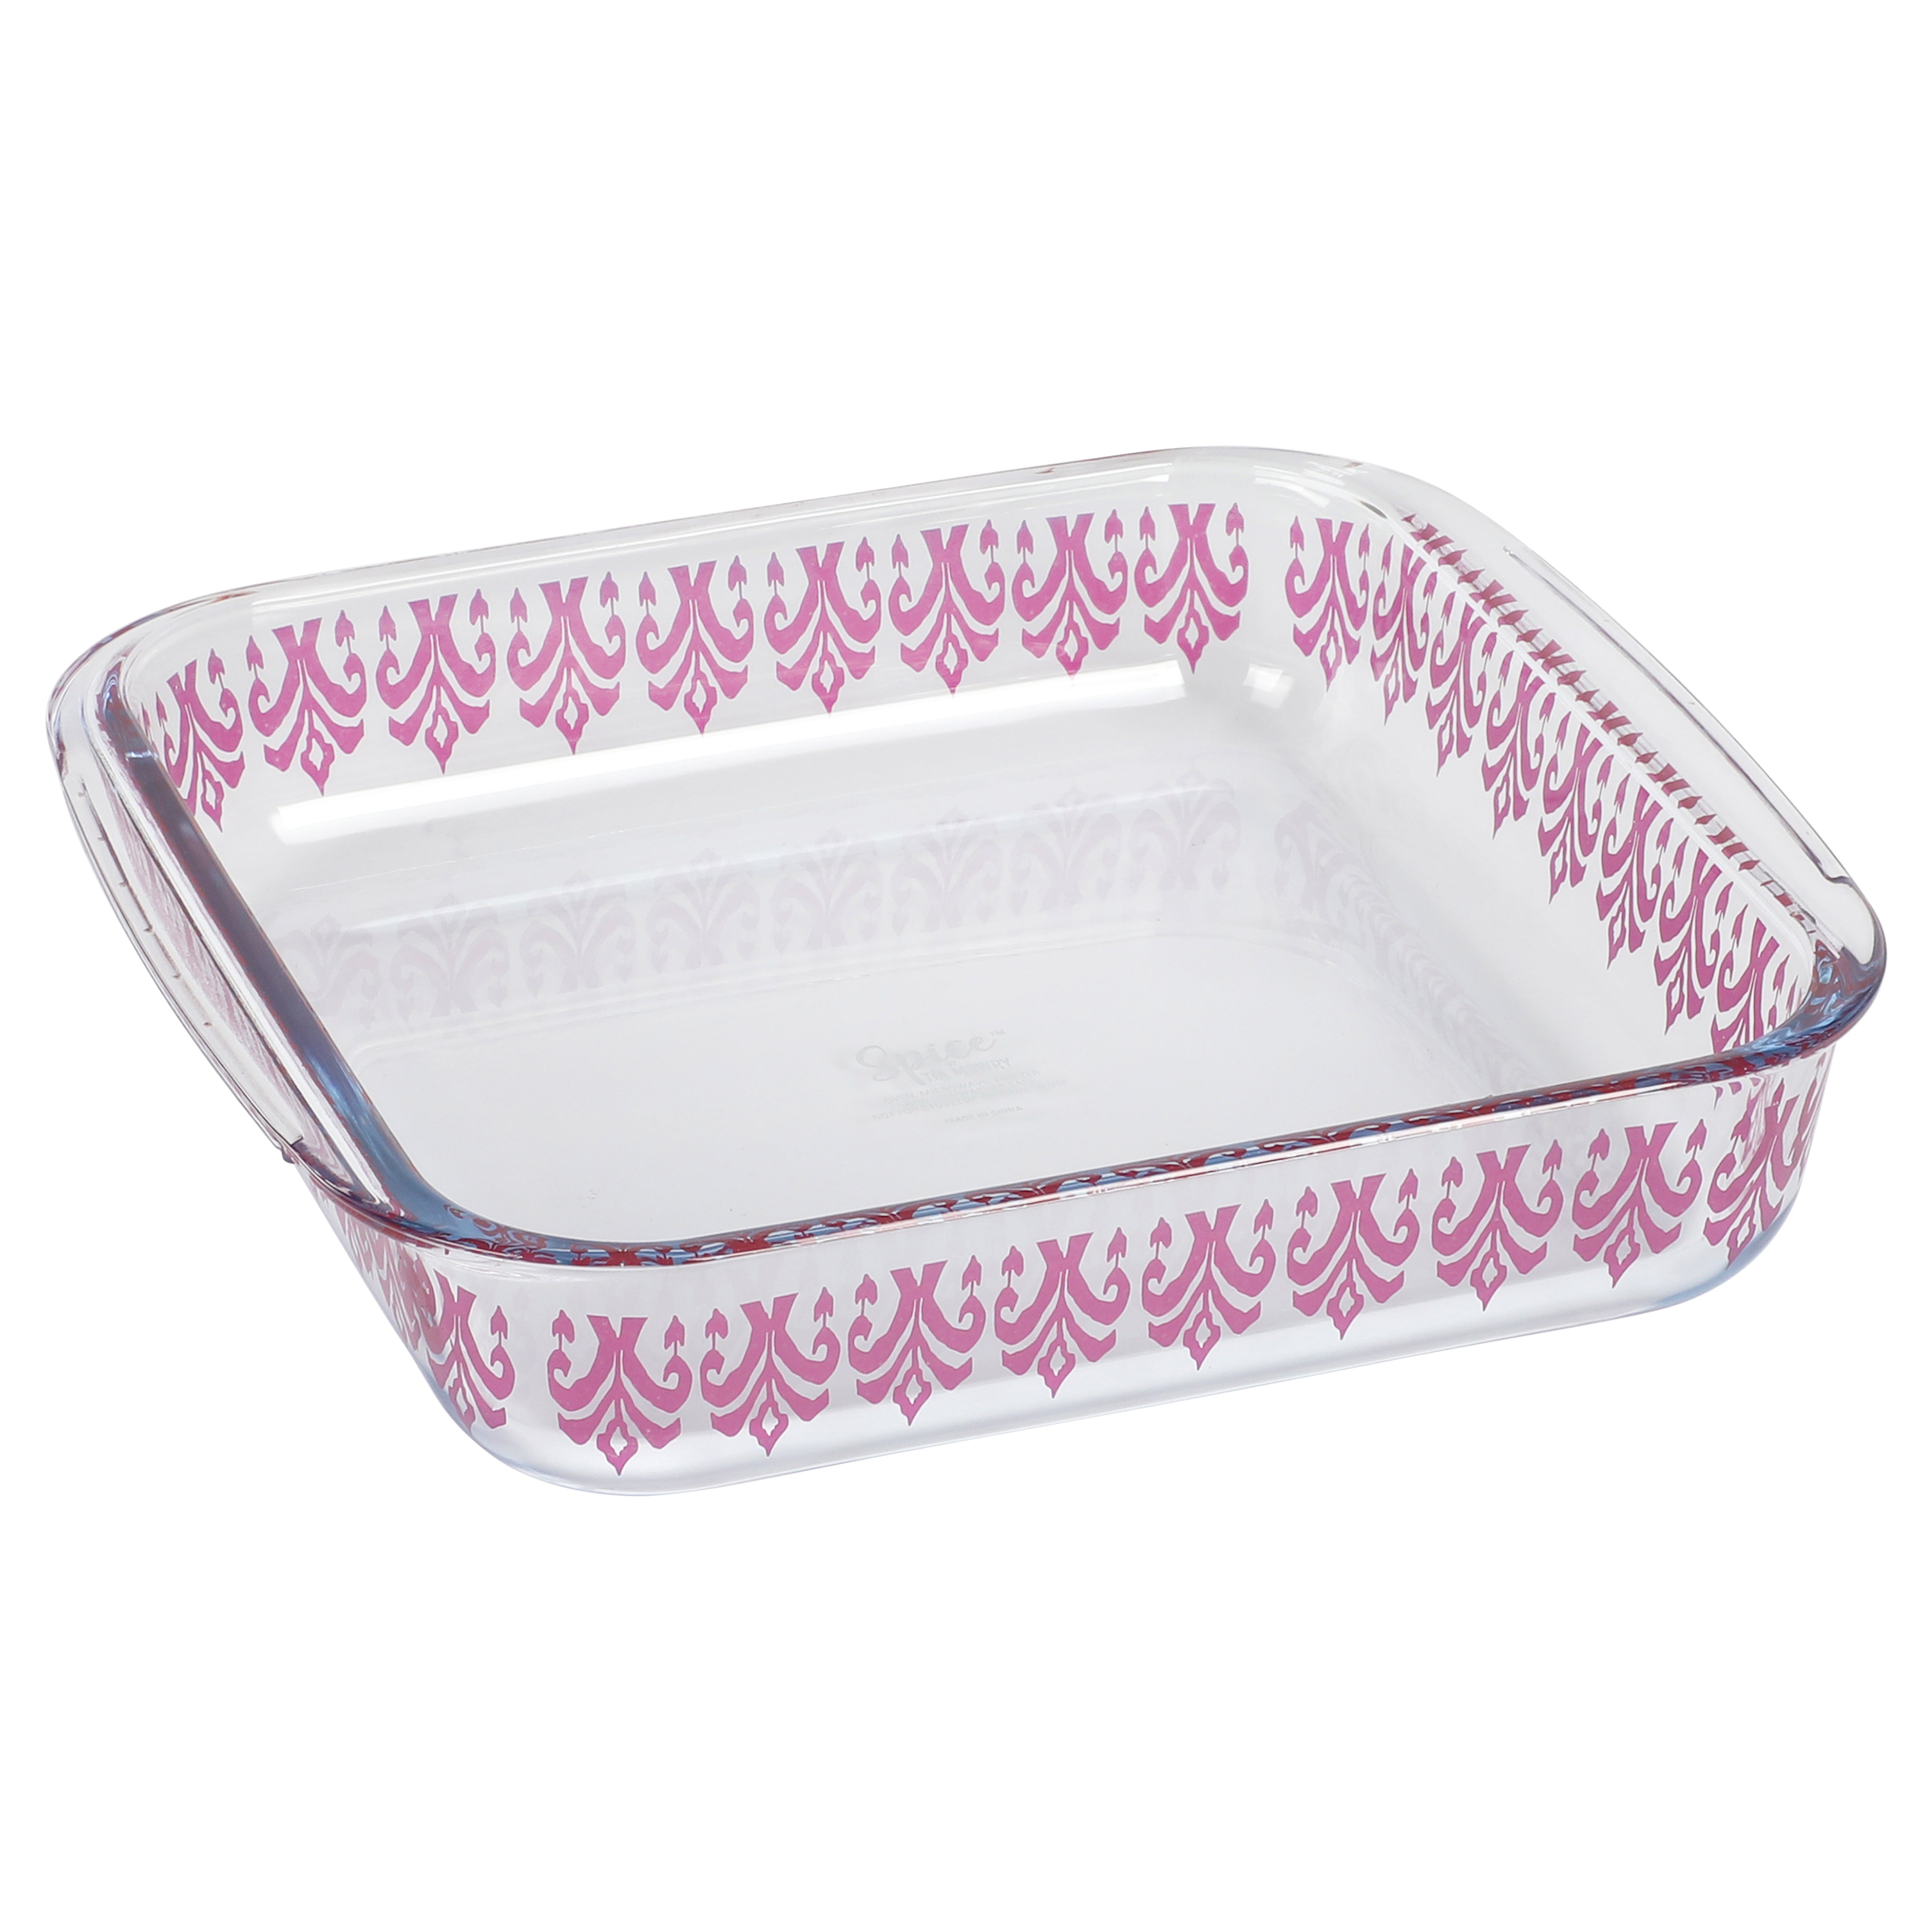 Spice by Tia Mowry Spice Cloves 1.8-Quart Oven, Dishwasher and Microwave Safe Borosilicate Glass Square Bakeware